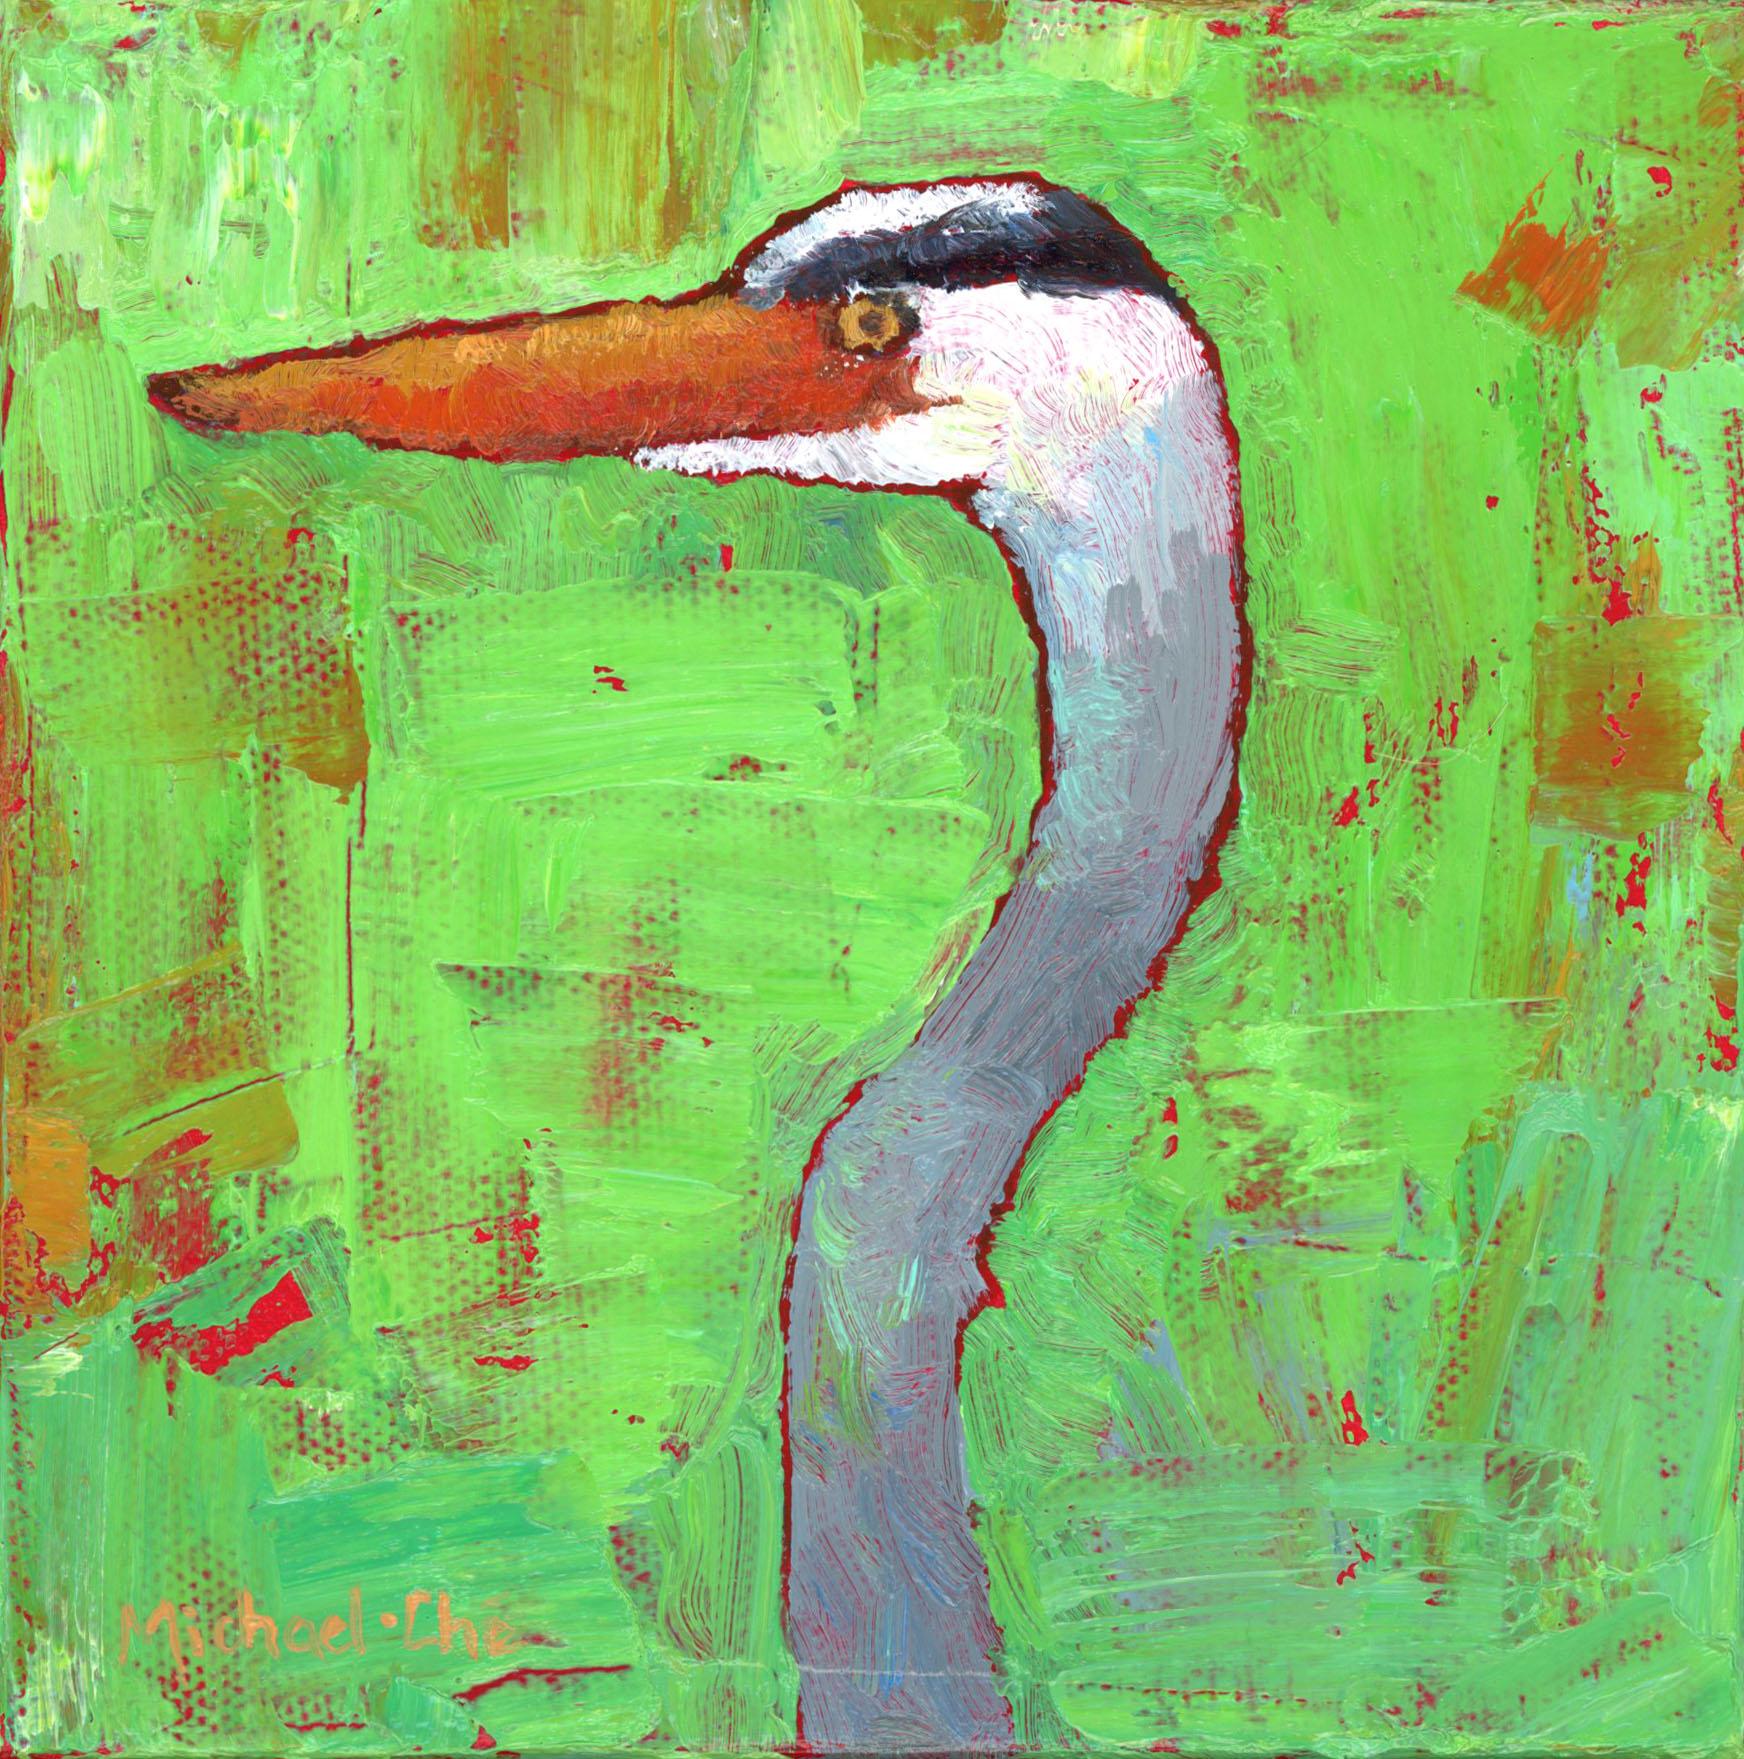 Michael-Che Swisher Animal Painting - "Stretching Out" Oil painting of a white stork over a green background